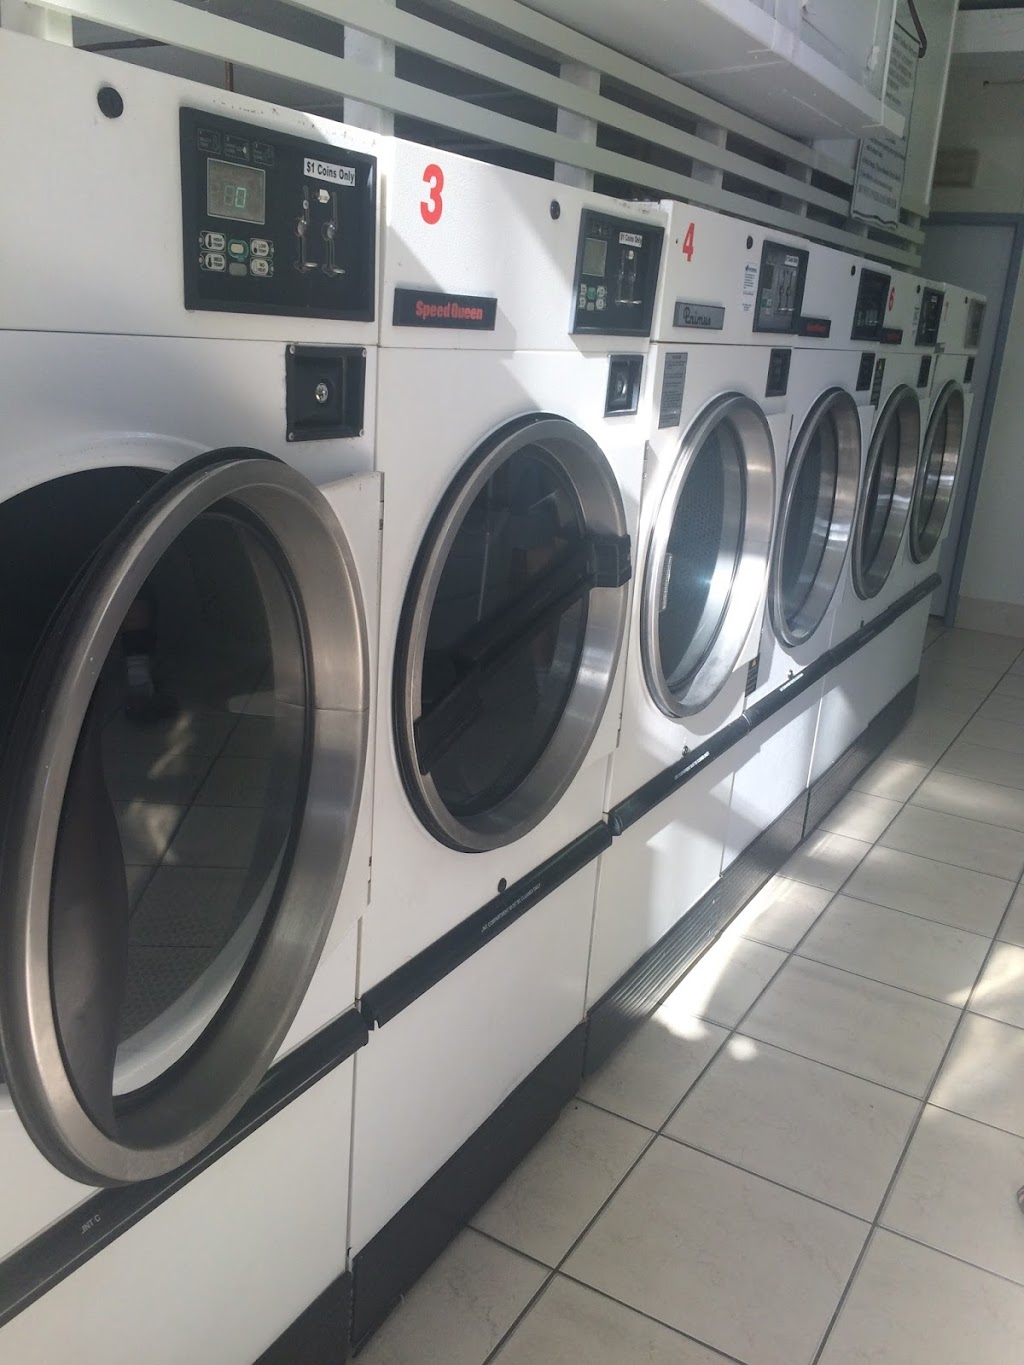 Beenleigh Laundromat | laundry | 3/71 Alamein St, Beenleigh QLD 4207, Australia | 1300362233 OR +61 1300 362 233